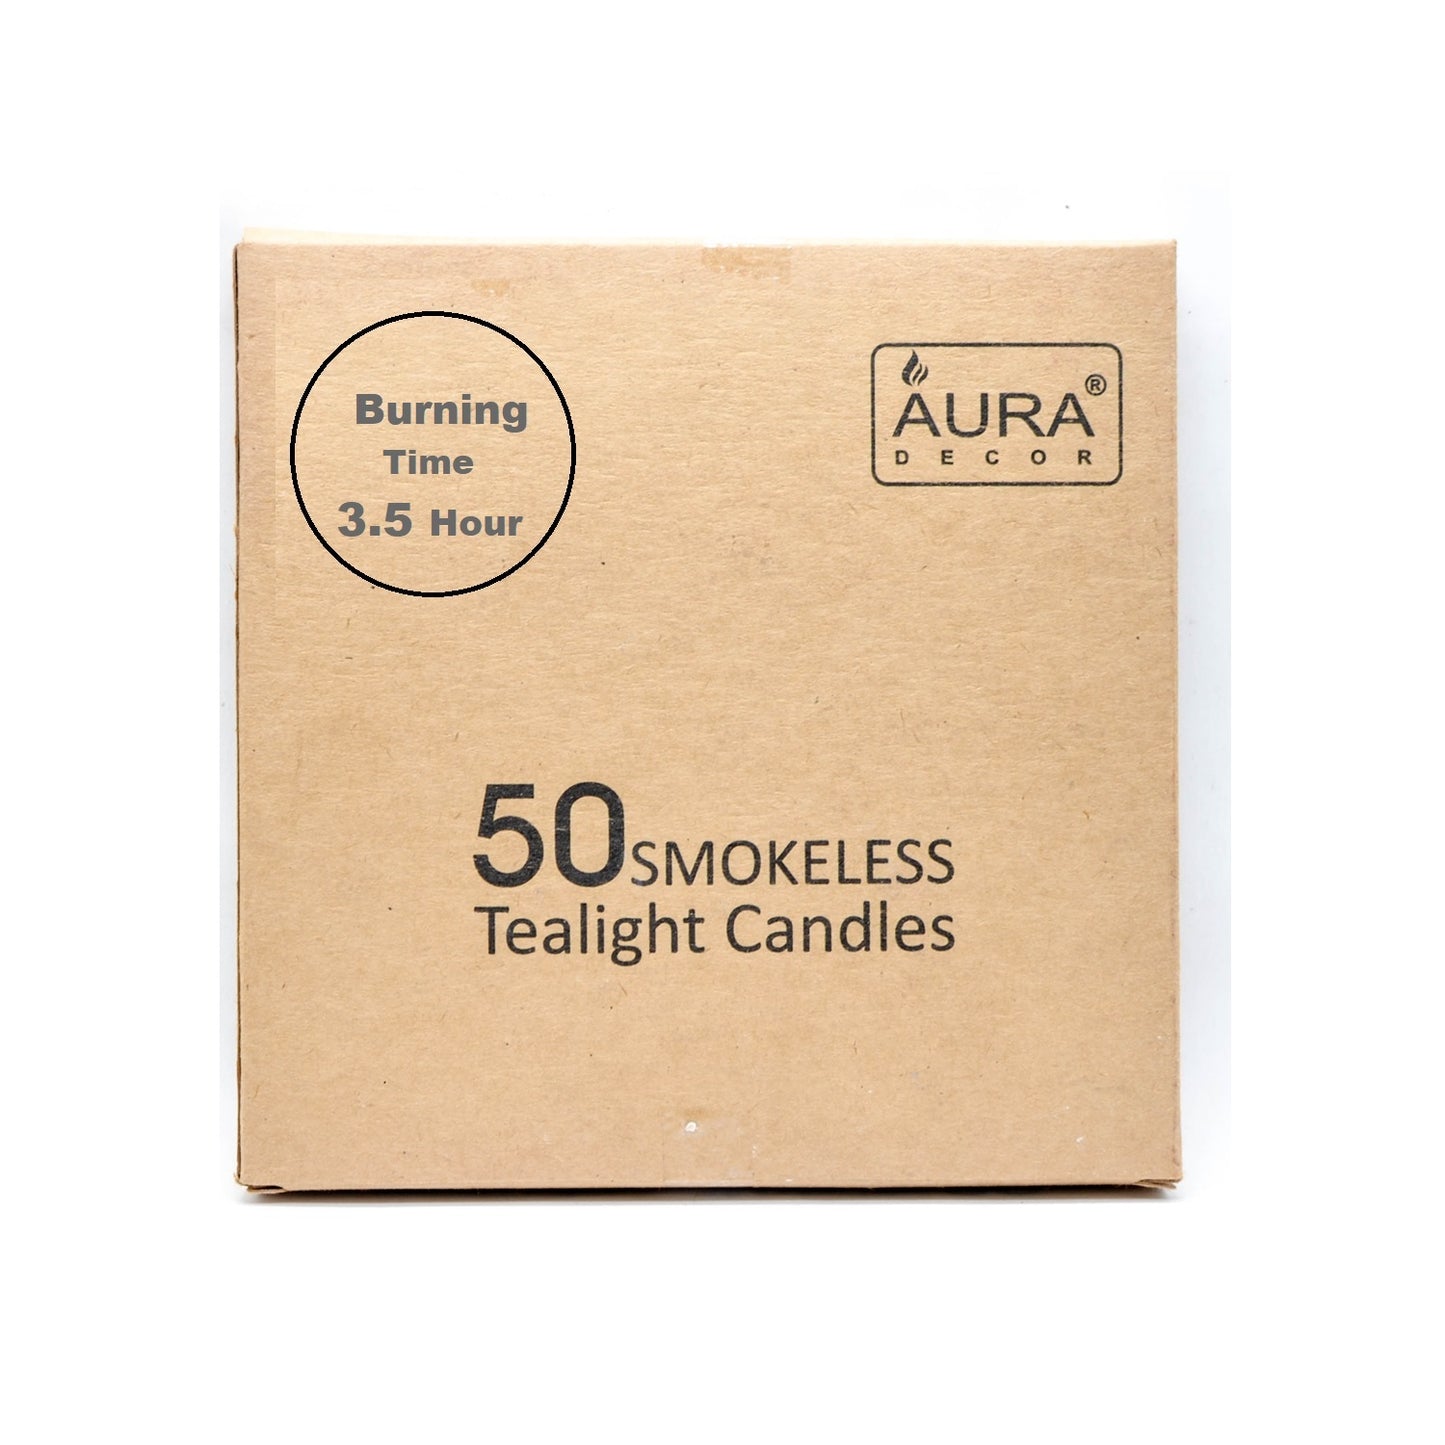 AuraDecor Pack of 50 Tealight Candles ( Burning Time 3 Hours Approx )